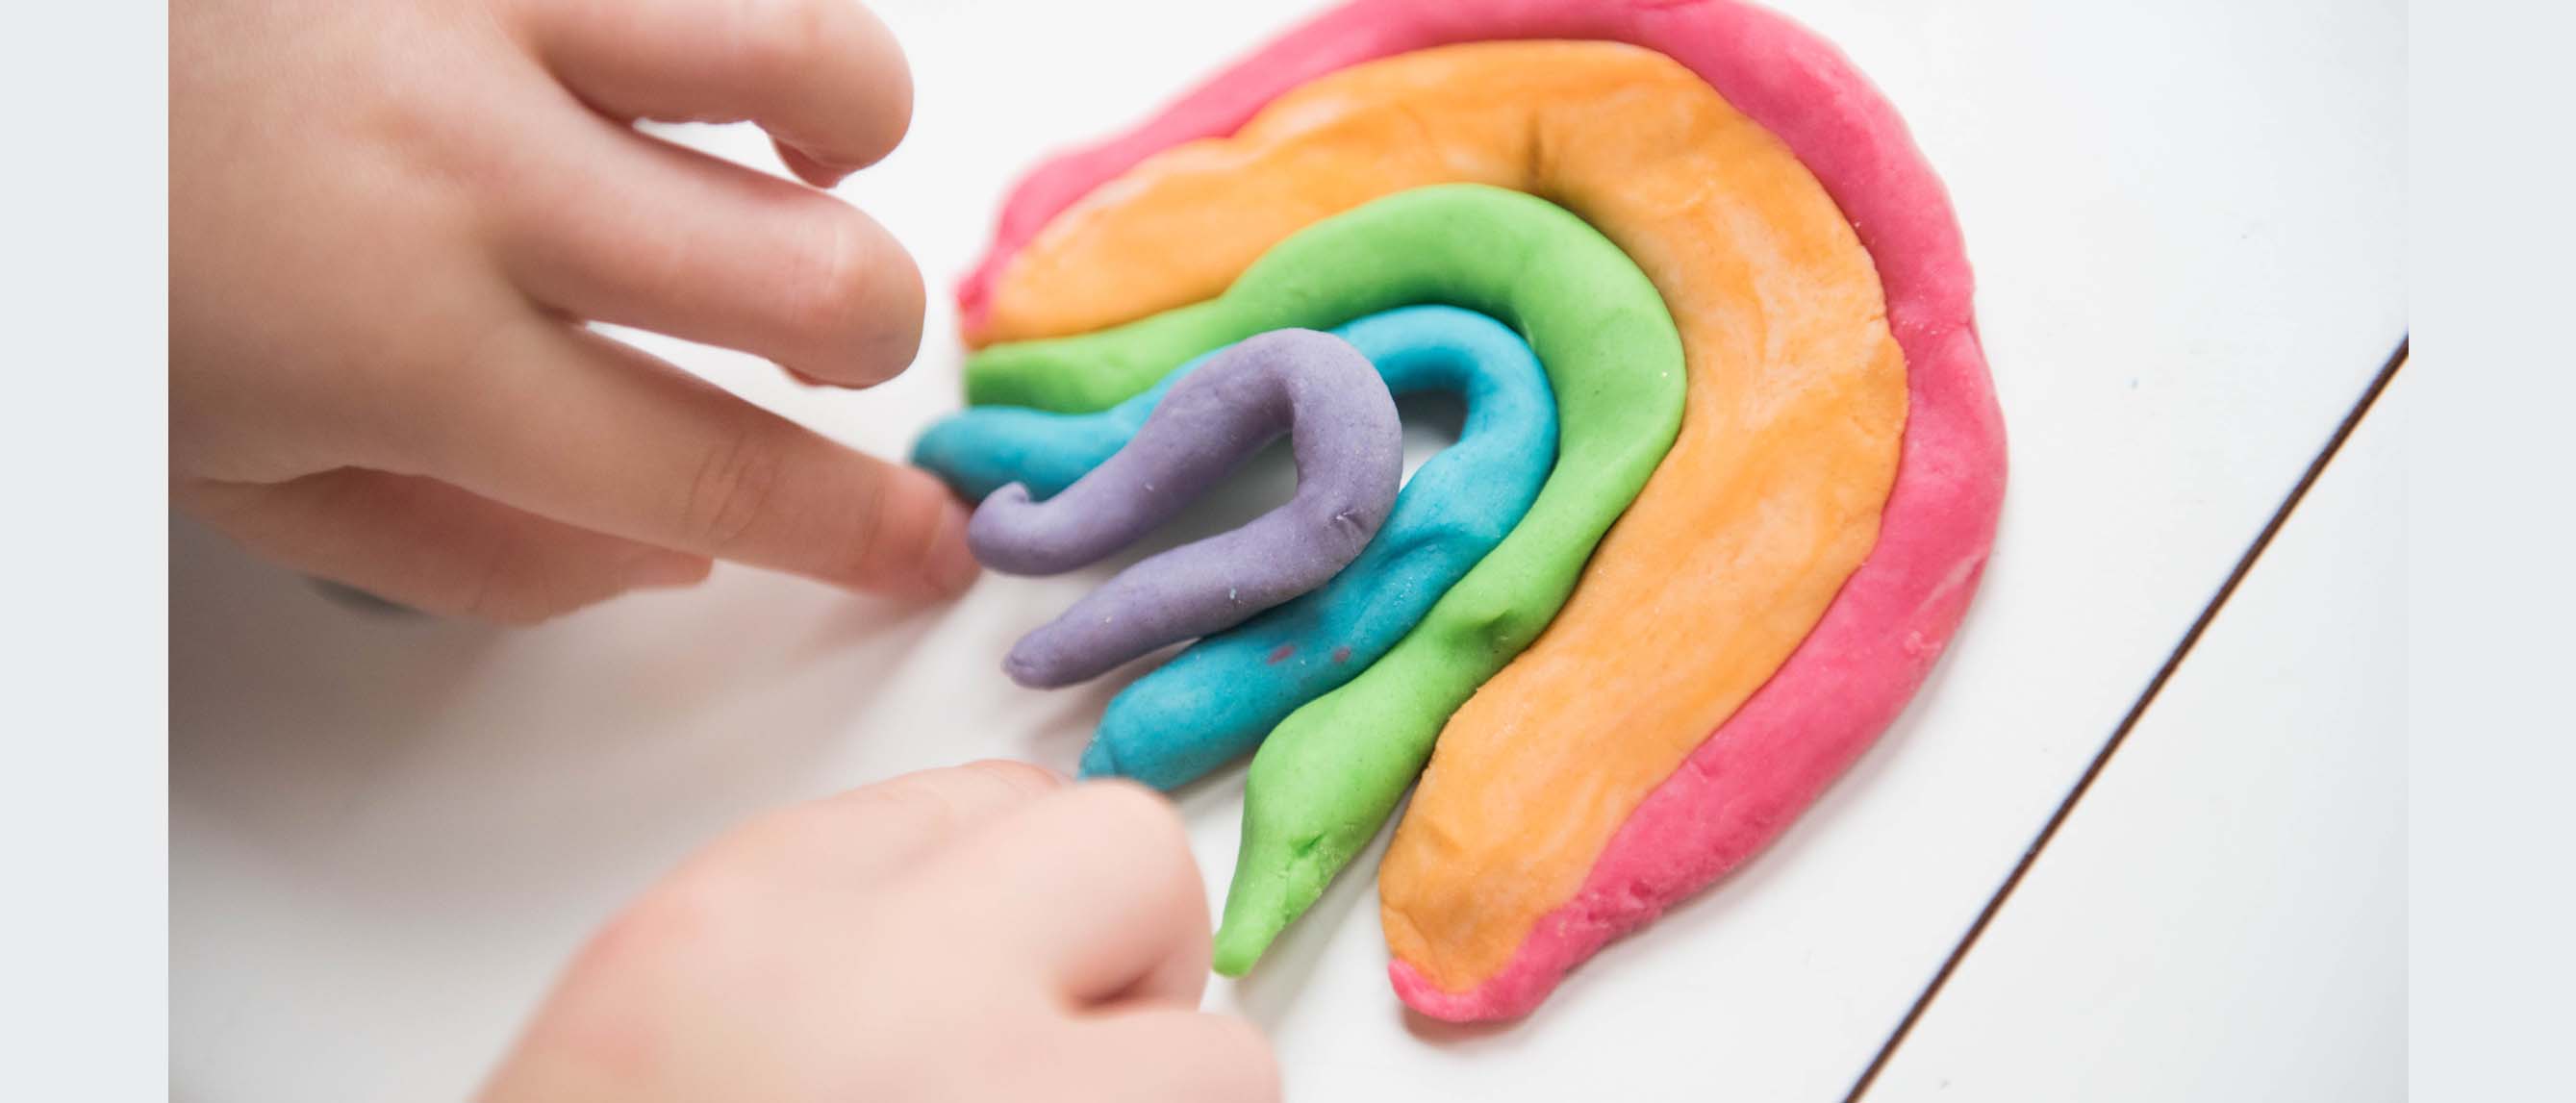 How to make playdough for tactile fun at home - Daily Mail